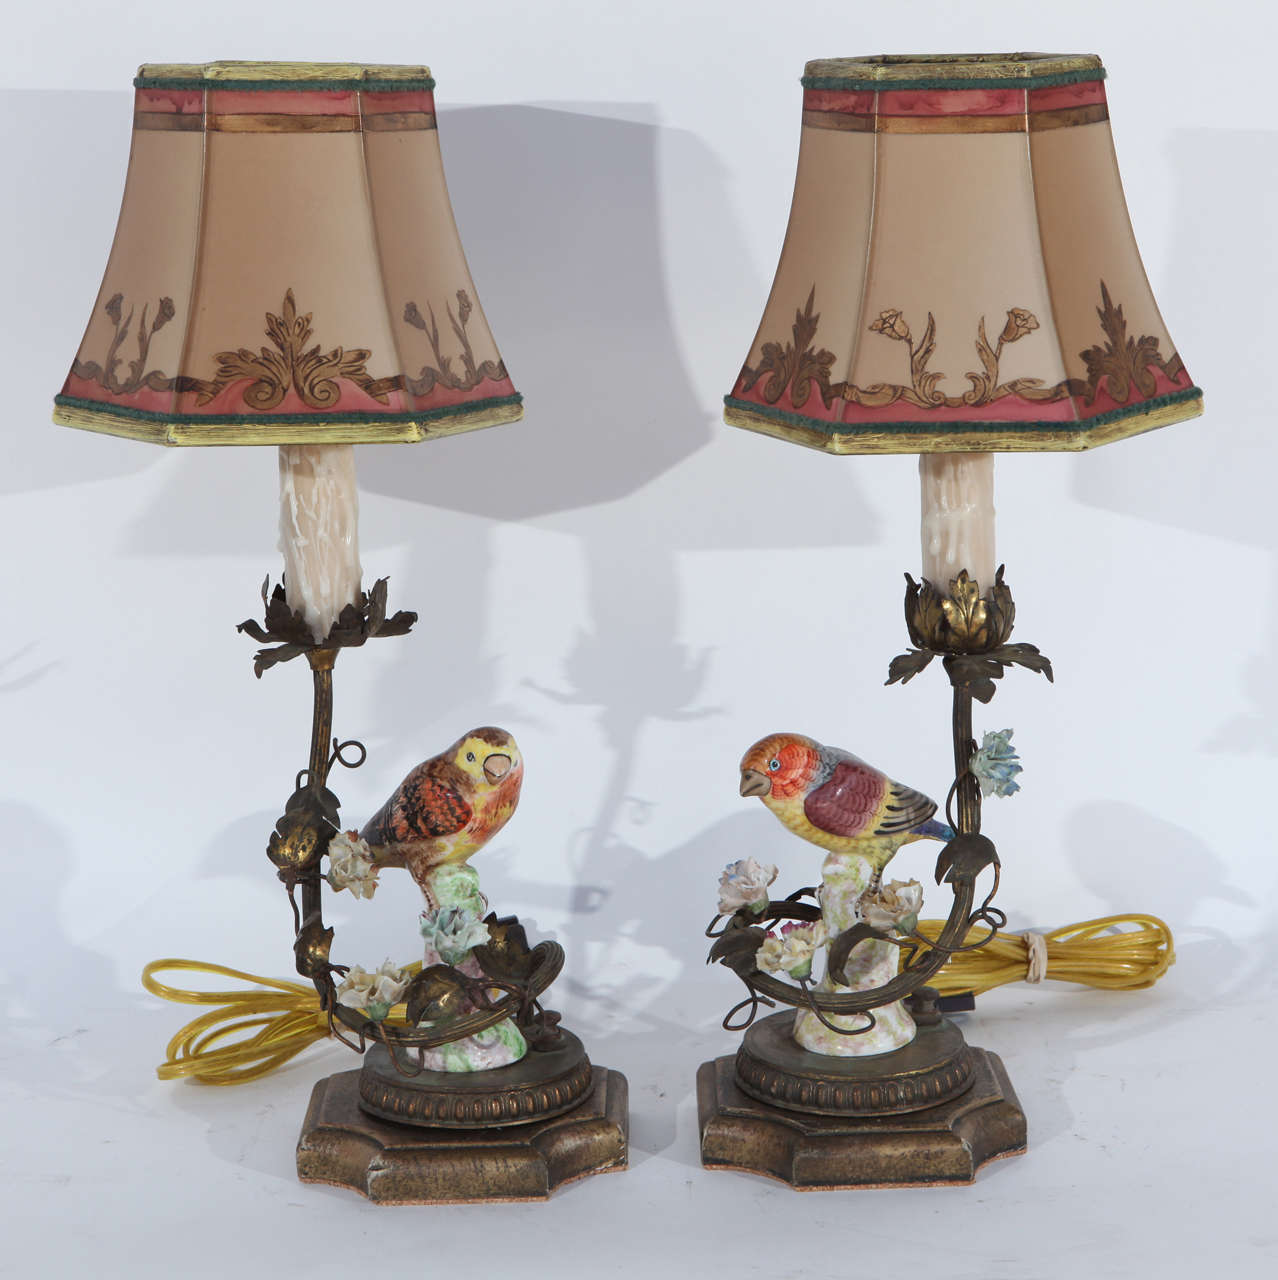 Pair of 1900's German Porcelain Birds converted to Lamps with French bronze mounting and porcelain flowers. The shades are included and are handmade of parchment paper. They are hand gilded and decorated. The lamps have been newly wired. The base